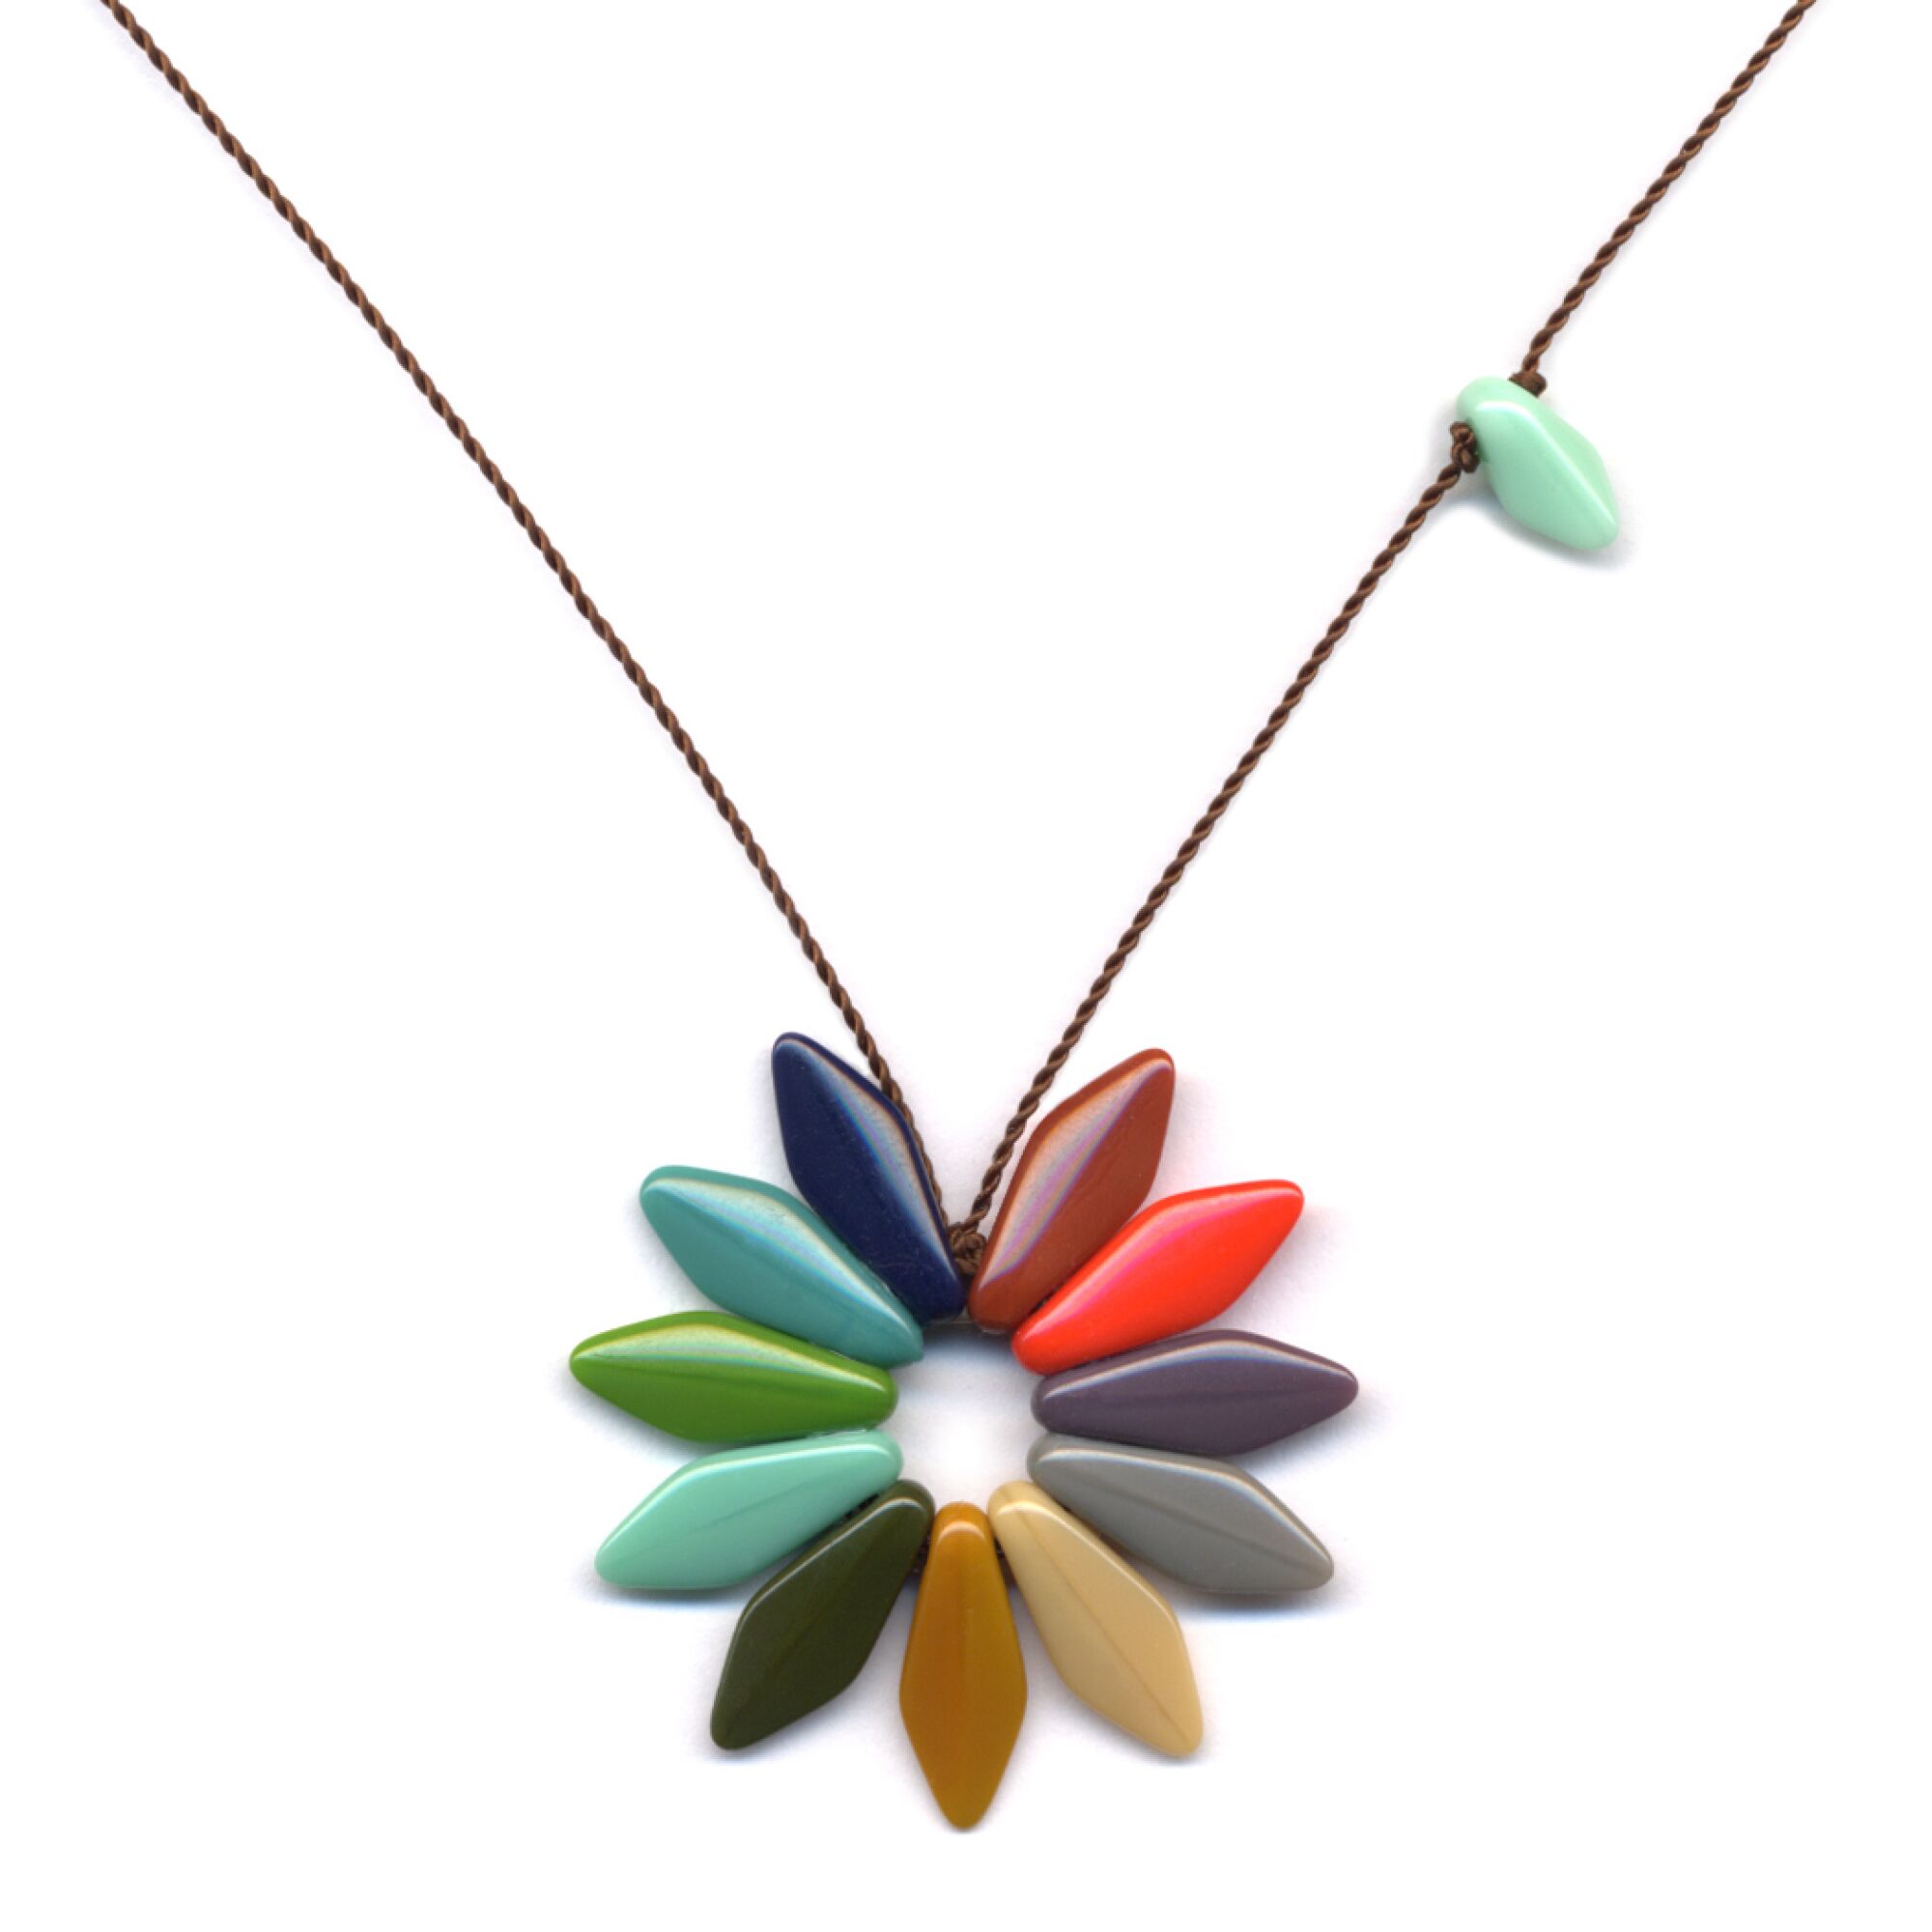 A colorful necklace.